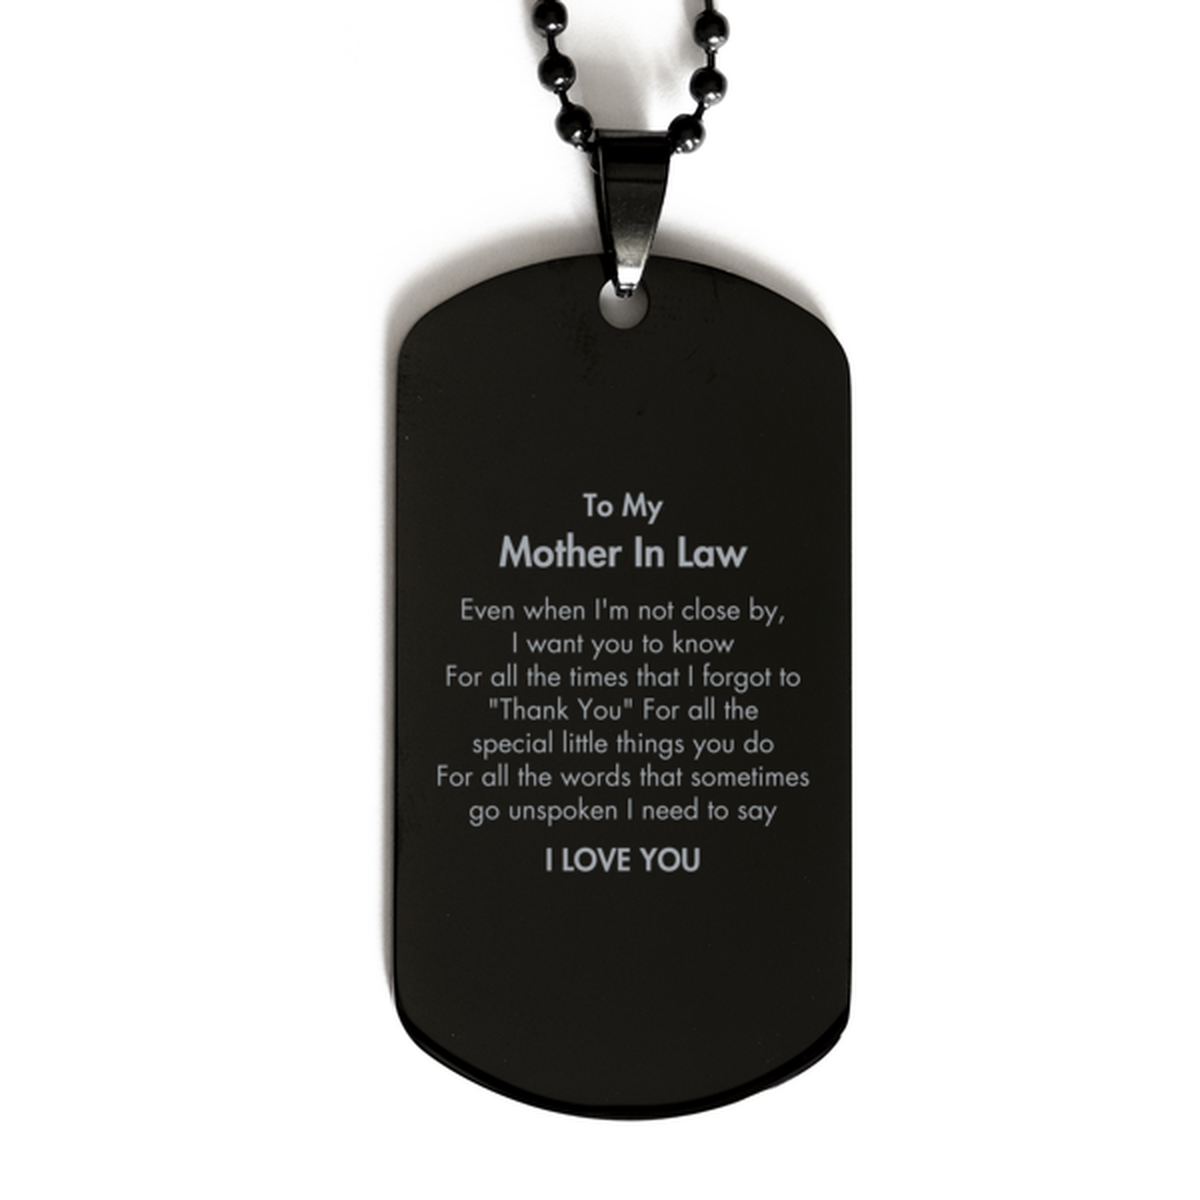 Thank You Gifts for Mother In Law, Keepsake Black Dog Tag Gifts for Mother In Law Birthday Mother's day Father's Day Mother In Law For all the words That sometimes go unspoken I need to say I LOVE YOU